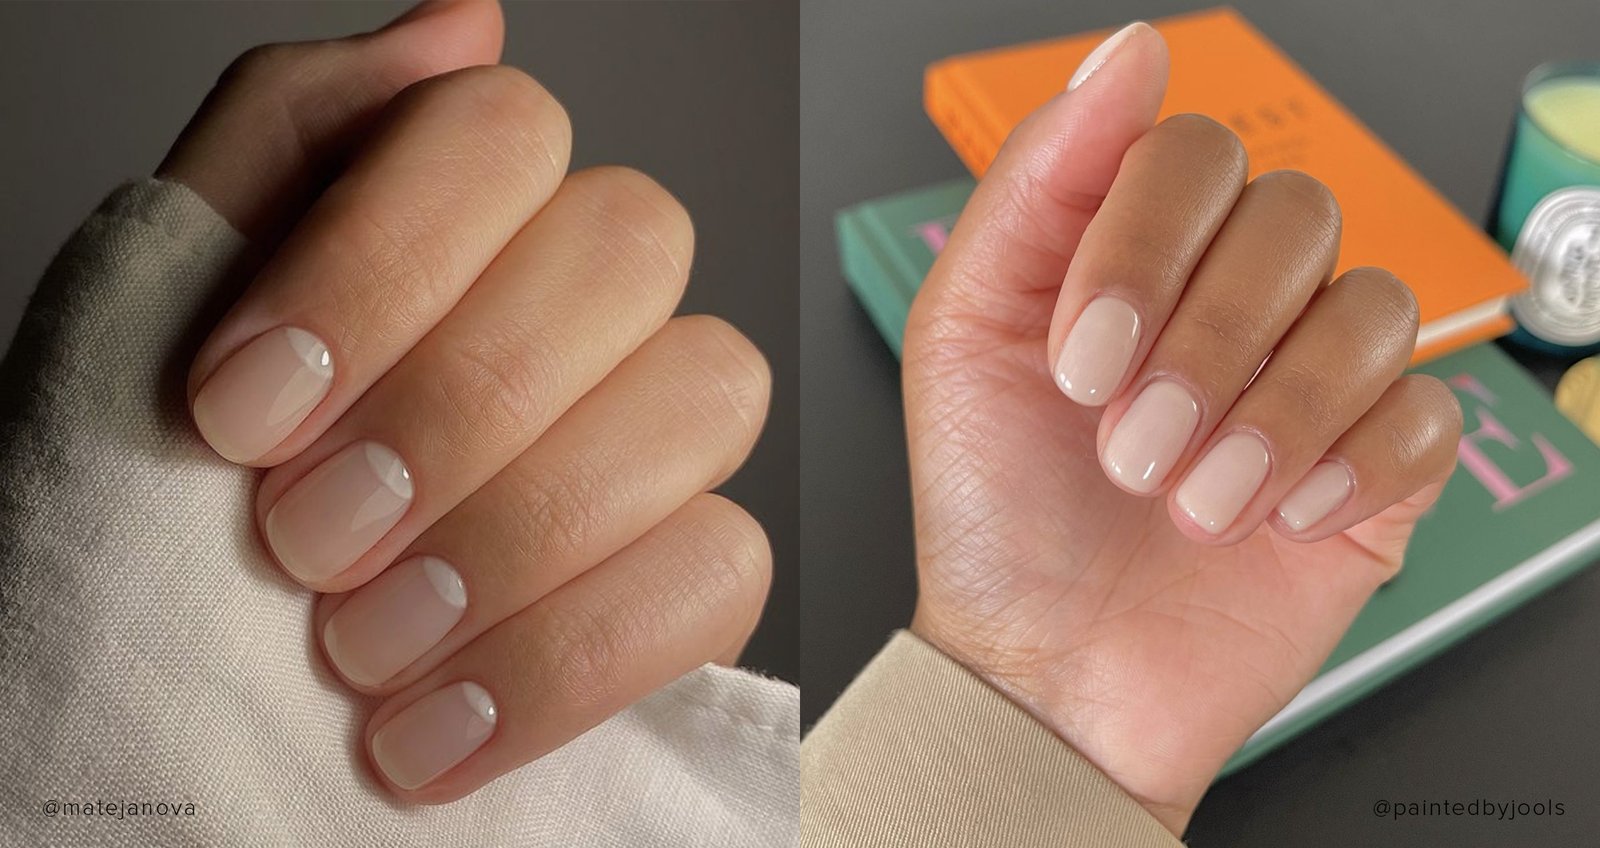 Soap Nails: The Low-Maintenance Manicure You Need